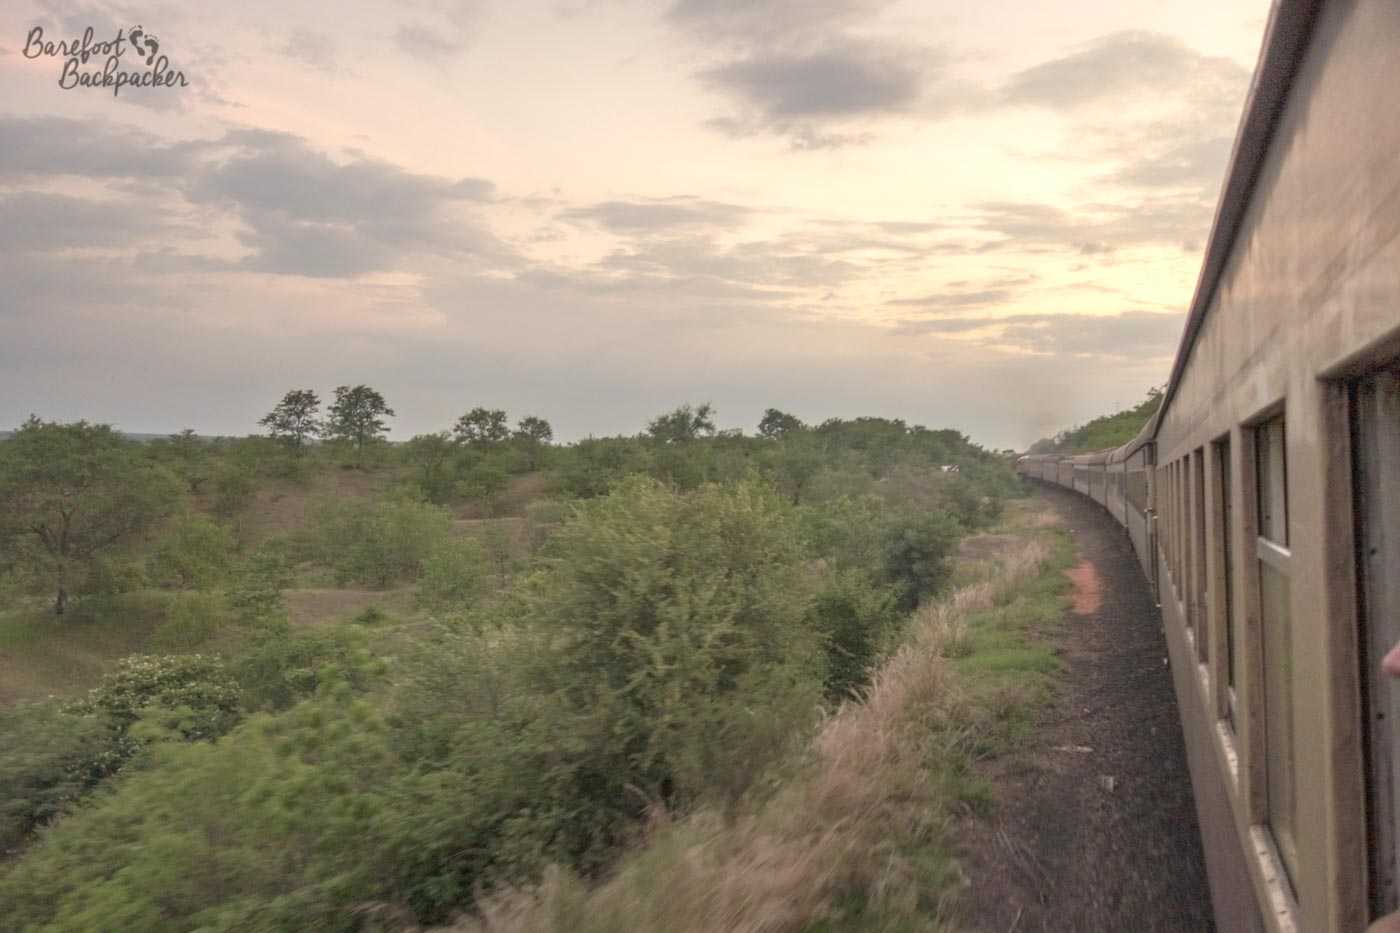 The train that runs between Victoria Falls and Bulawayo, not long after setting out, going through the shrubland of northern Zimbabwe.